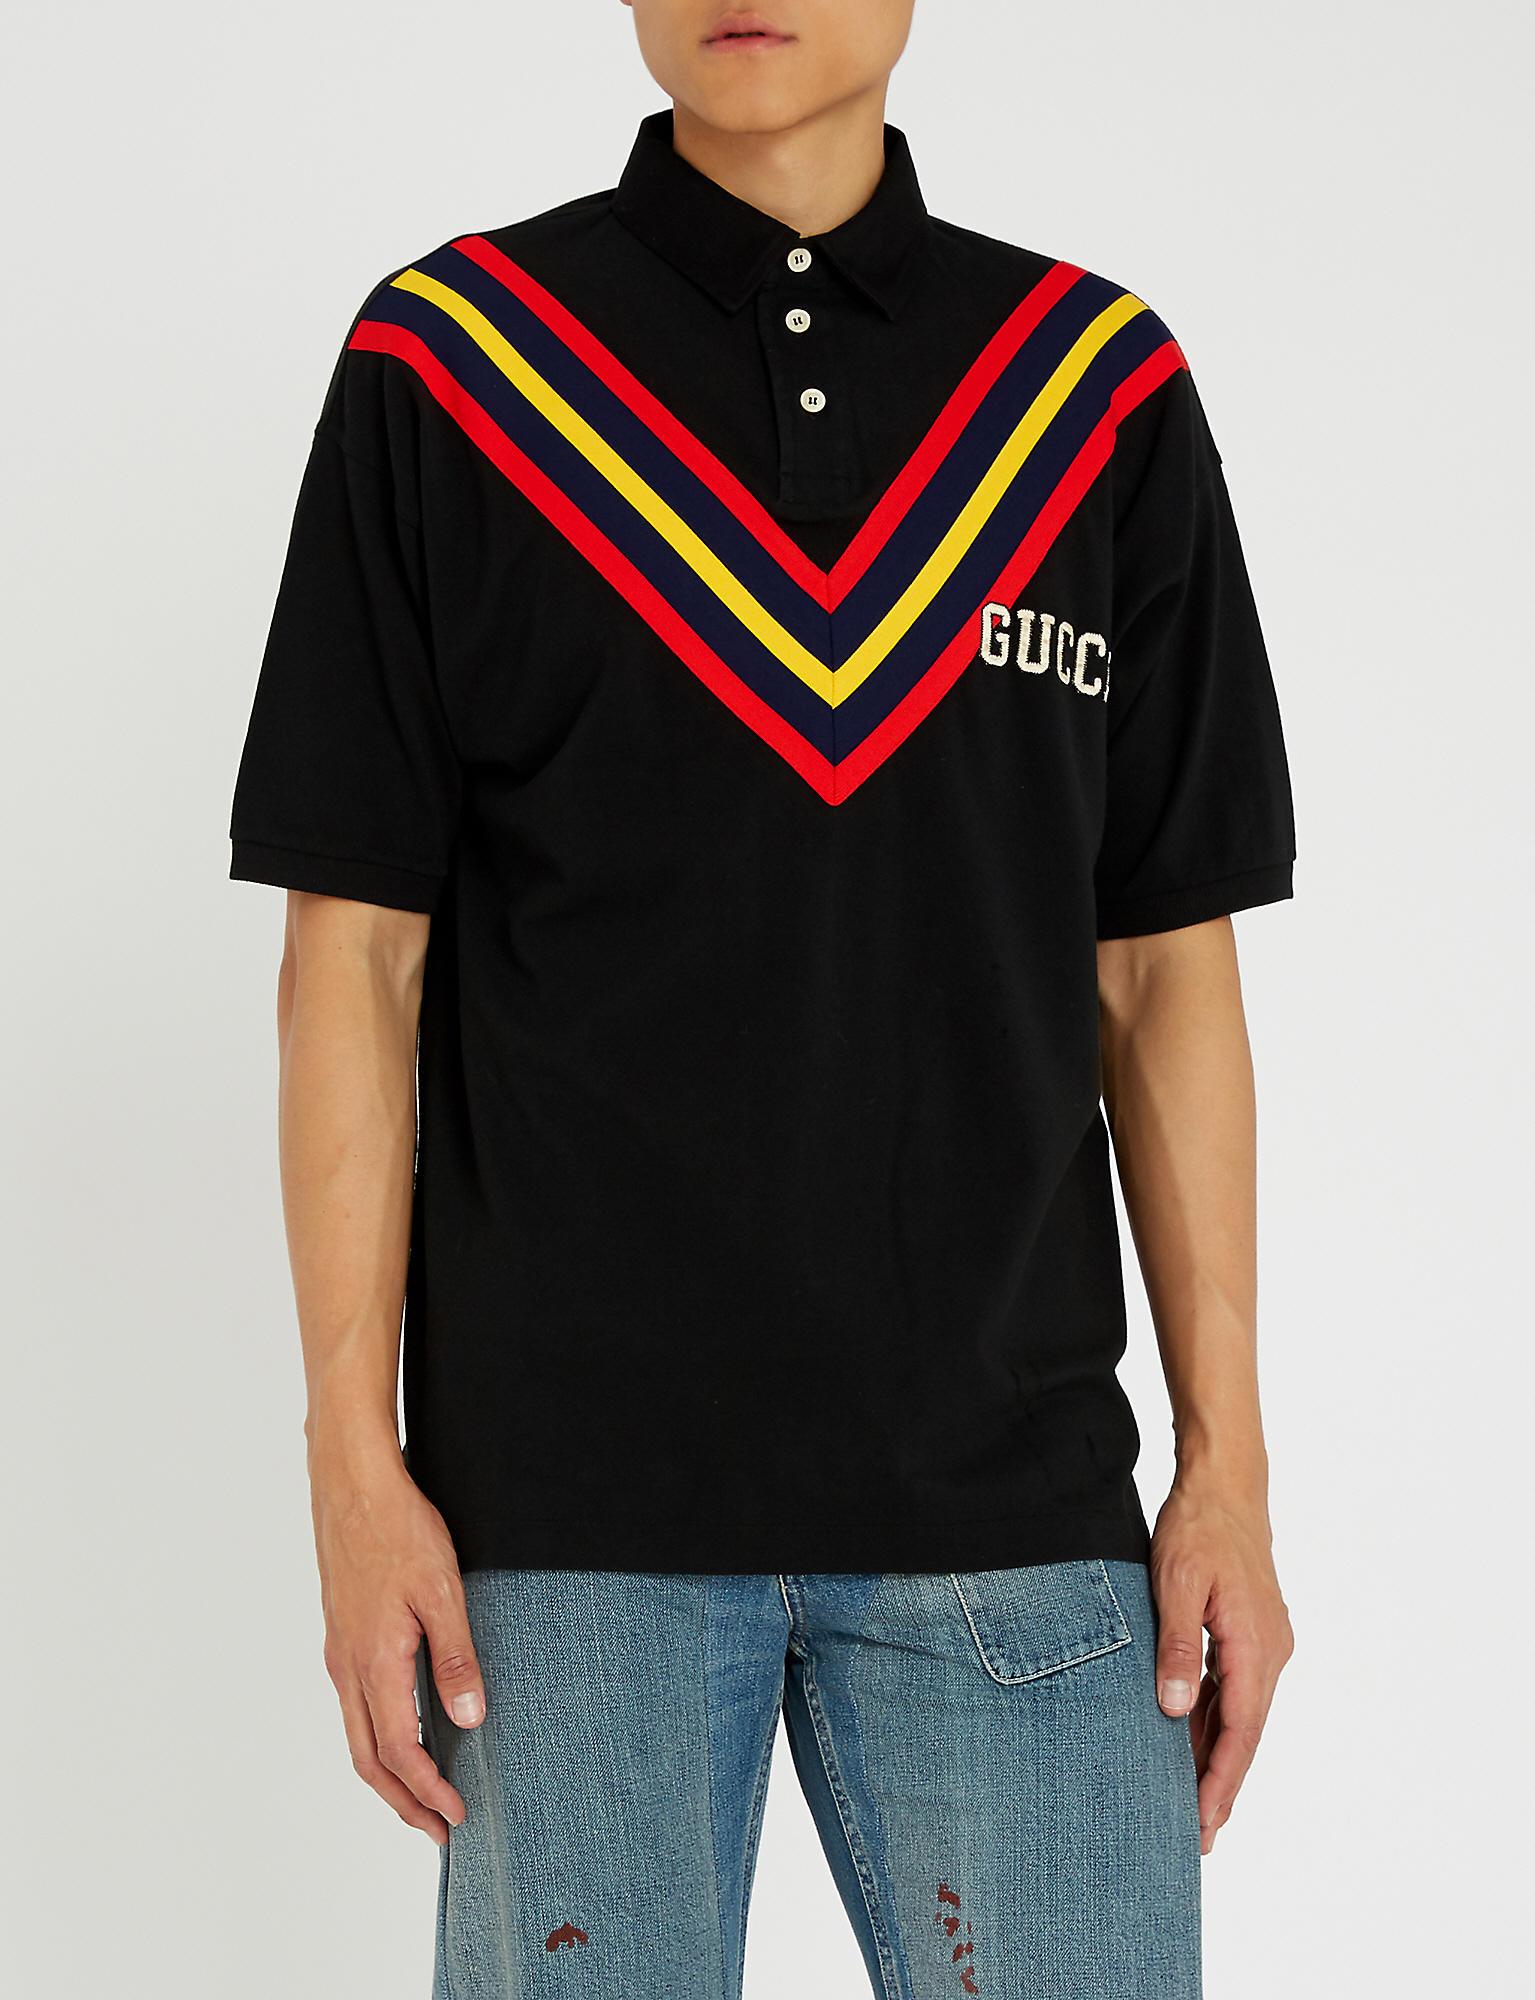 Gucci Graphic Print Cotton Polo Shirt in Black for Men | Lyst